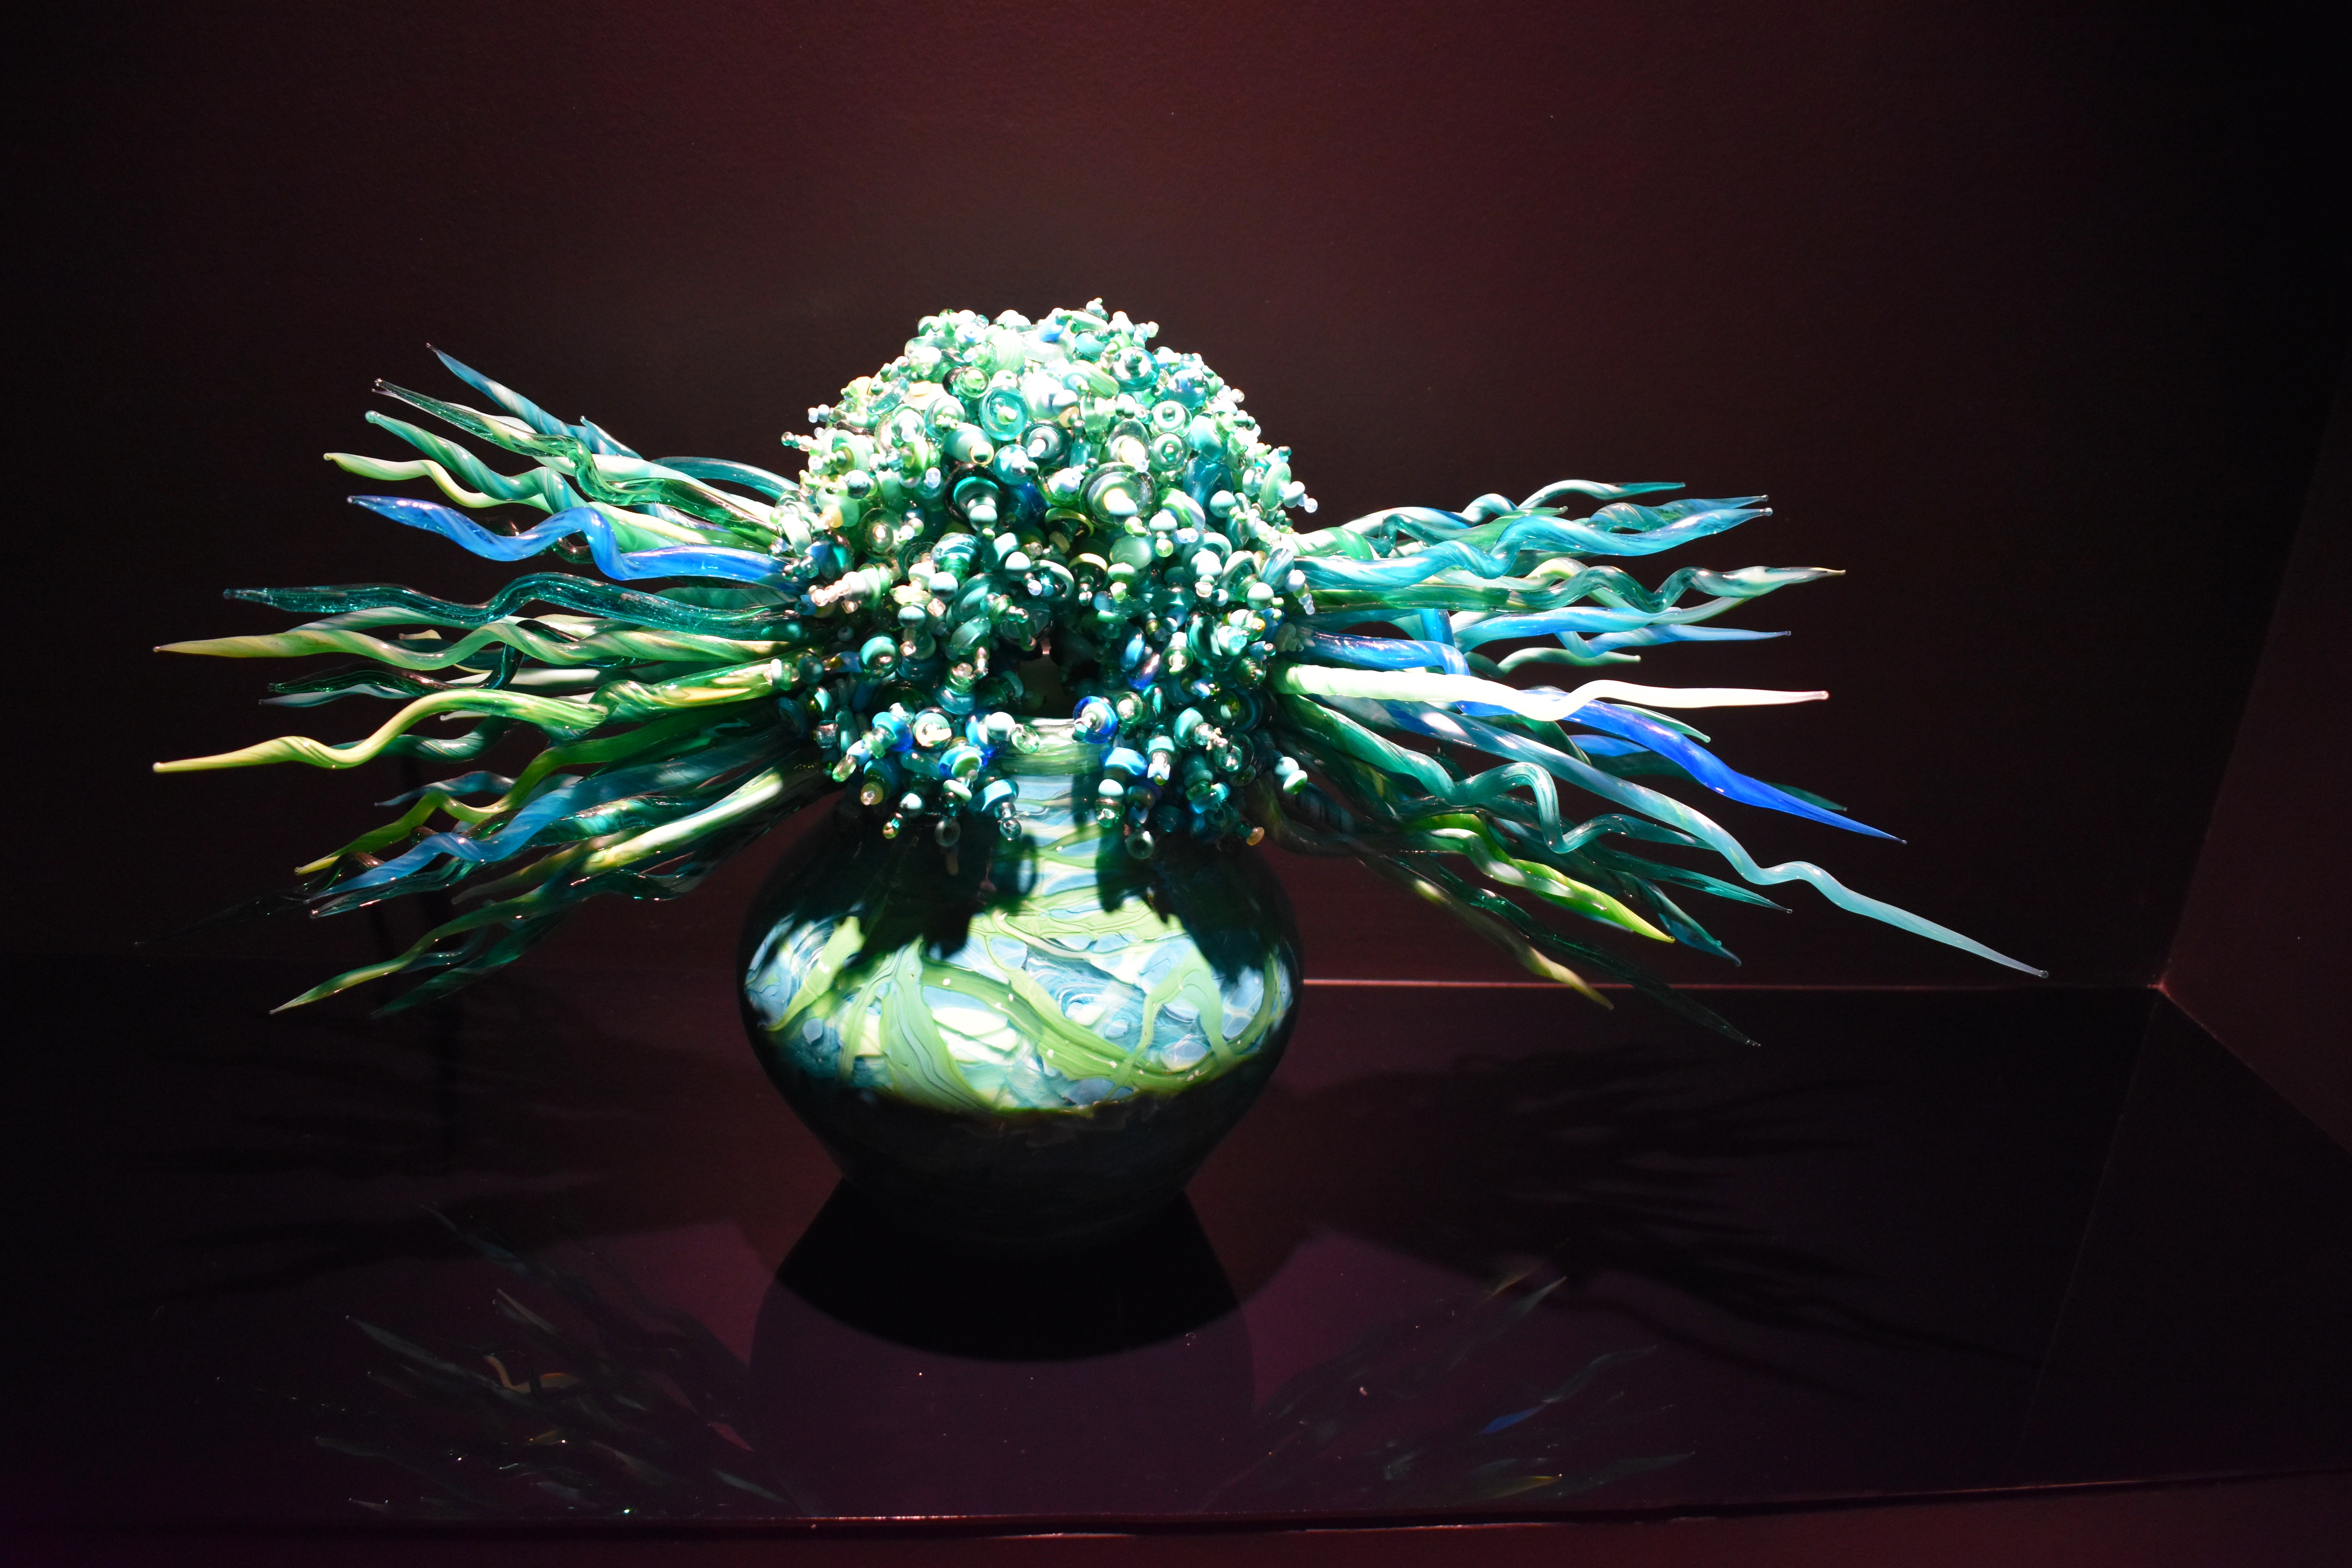 Glass art by Laura Donefer on display at the Imagine Museum. Photo by Kai Warren.